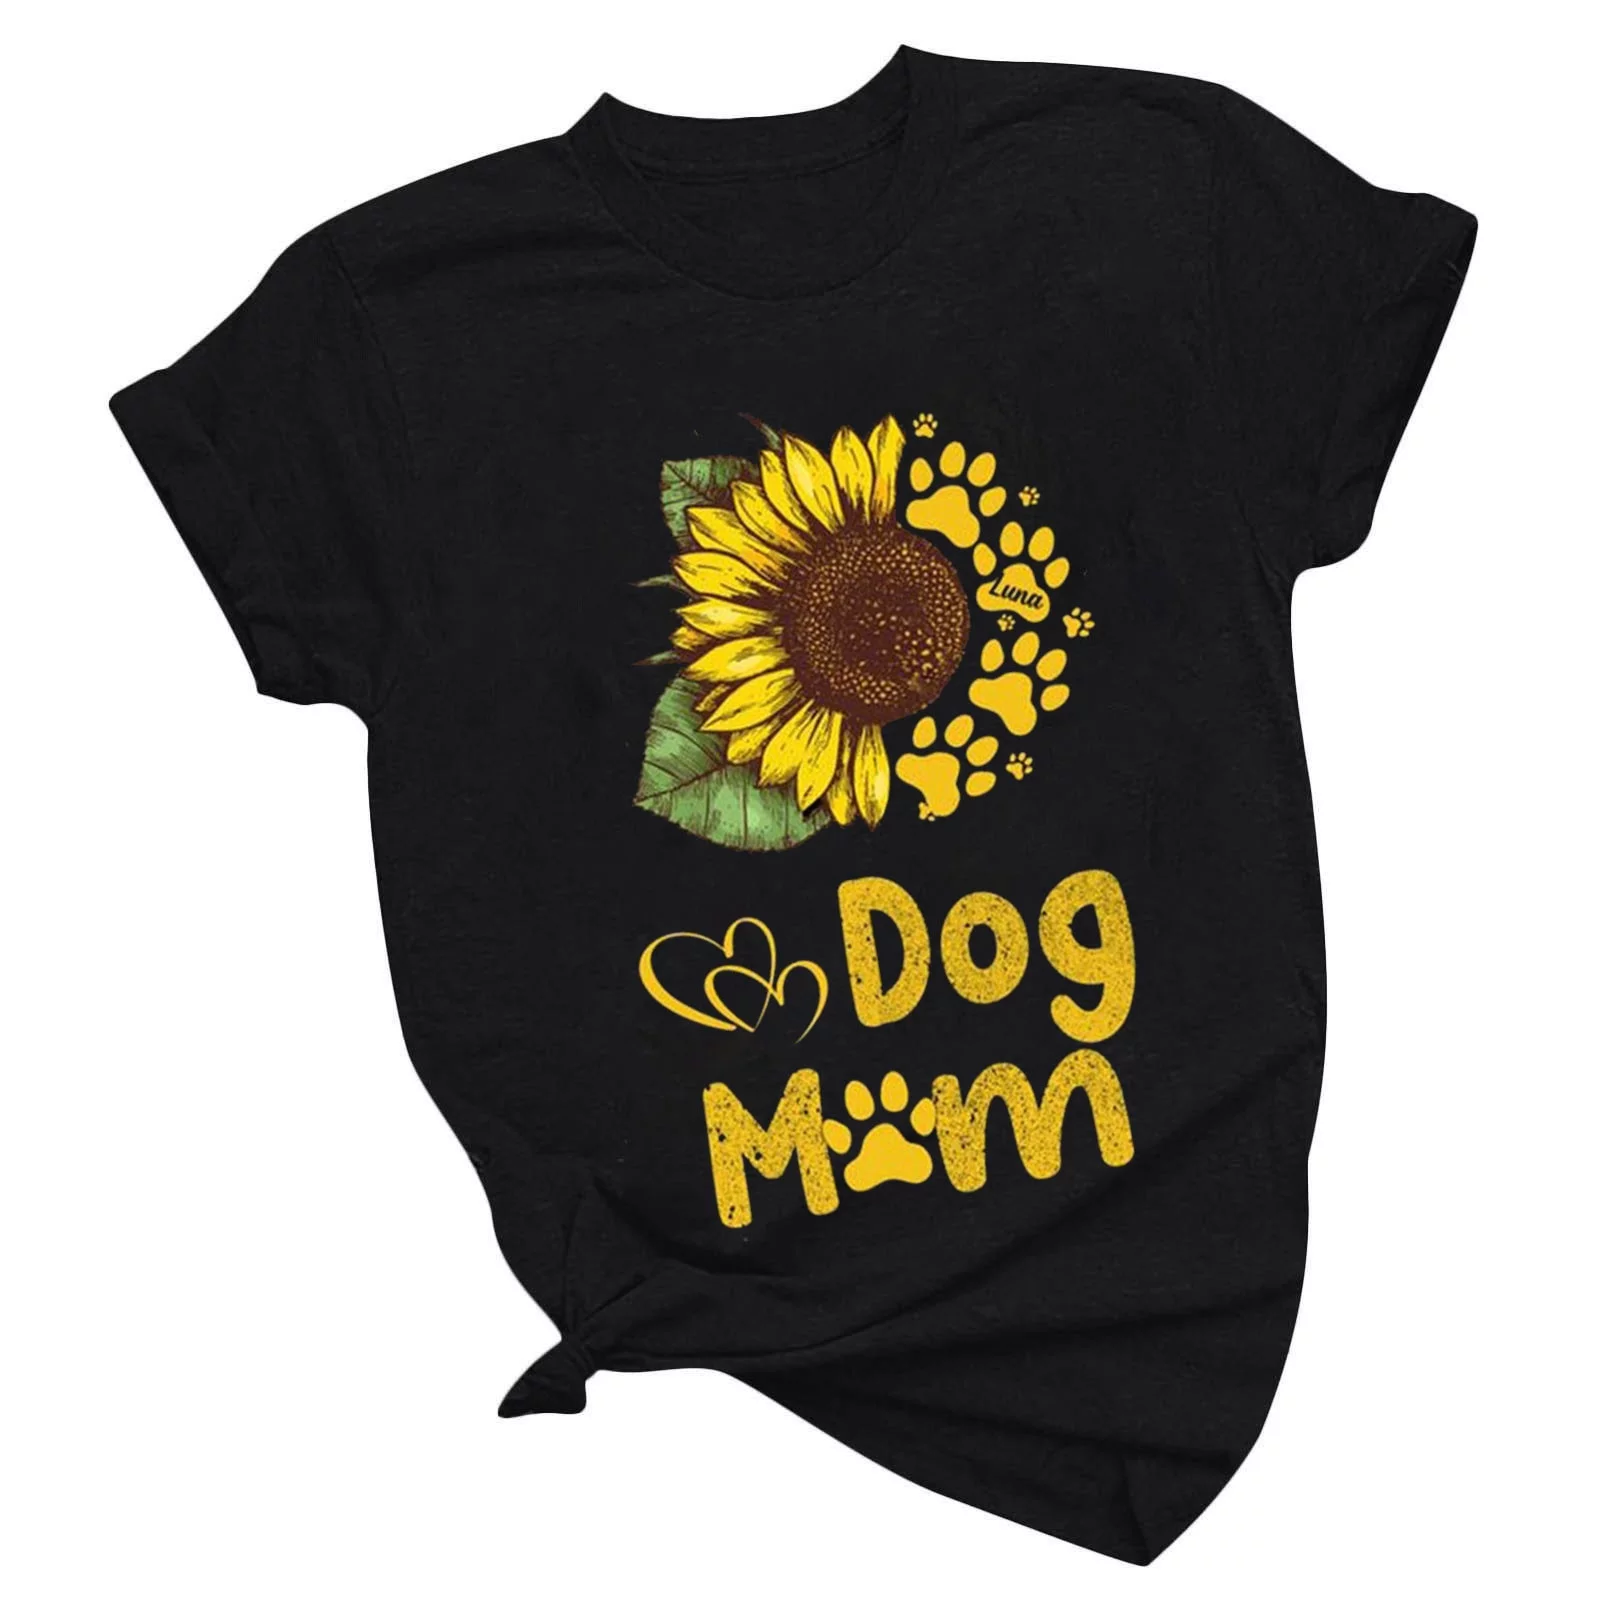 CYMMPU Short Sleeve Oversized Tees Clearance Women's Trendy Clothing dog mom Retro Funny Letter Print Country Shirts Summer Tunic Fashion Tops Round Neck Tshirts Black L